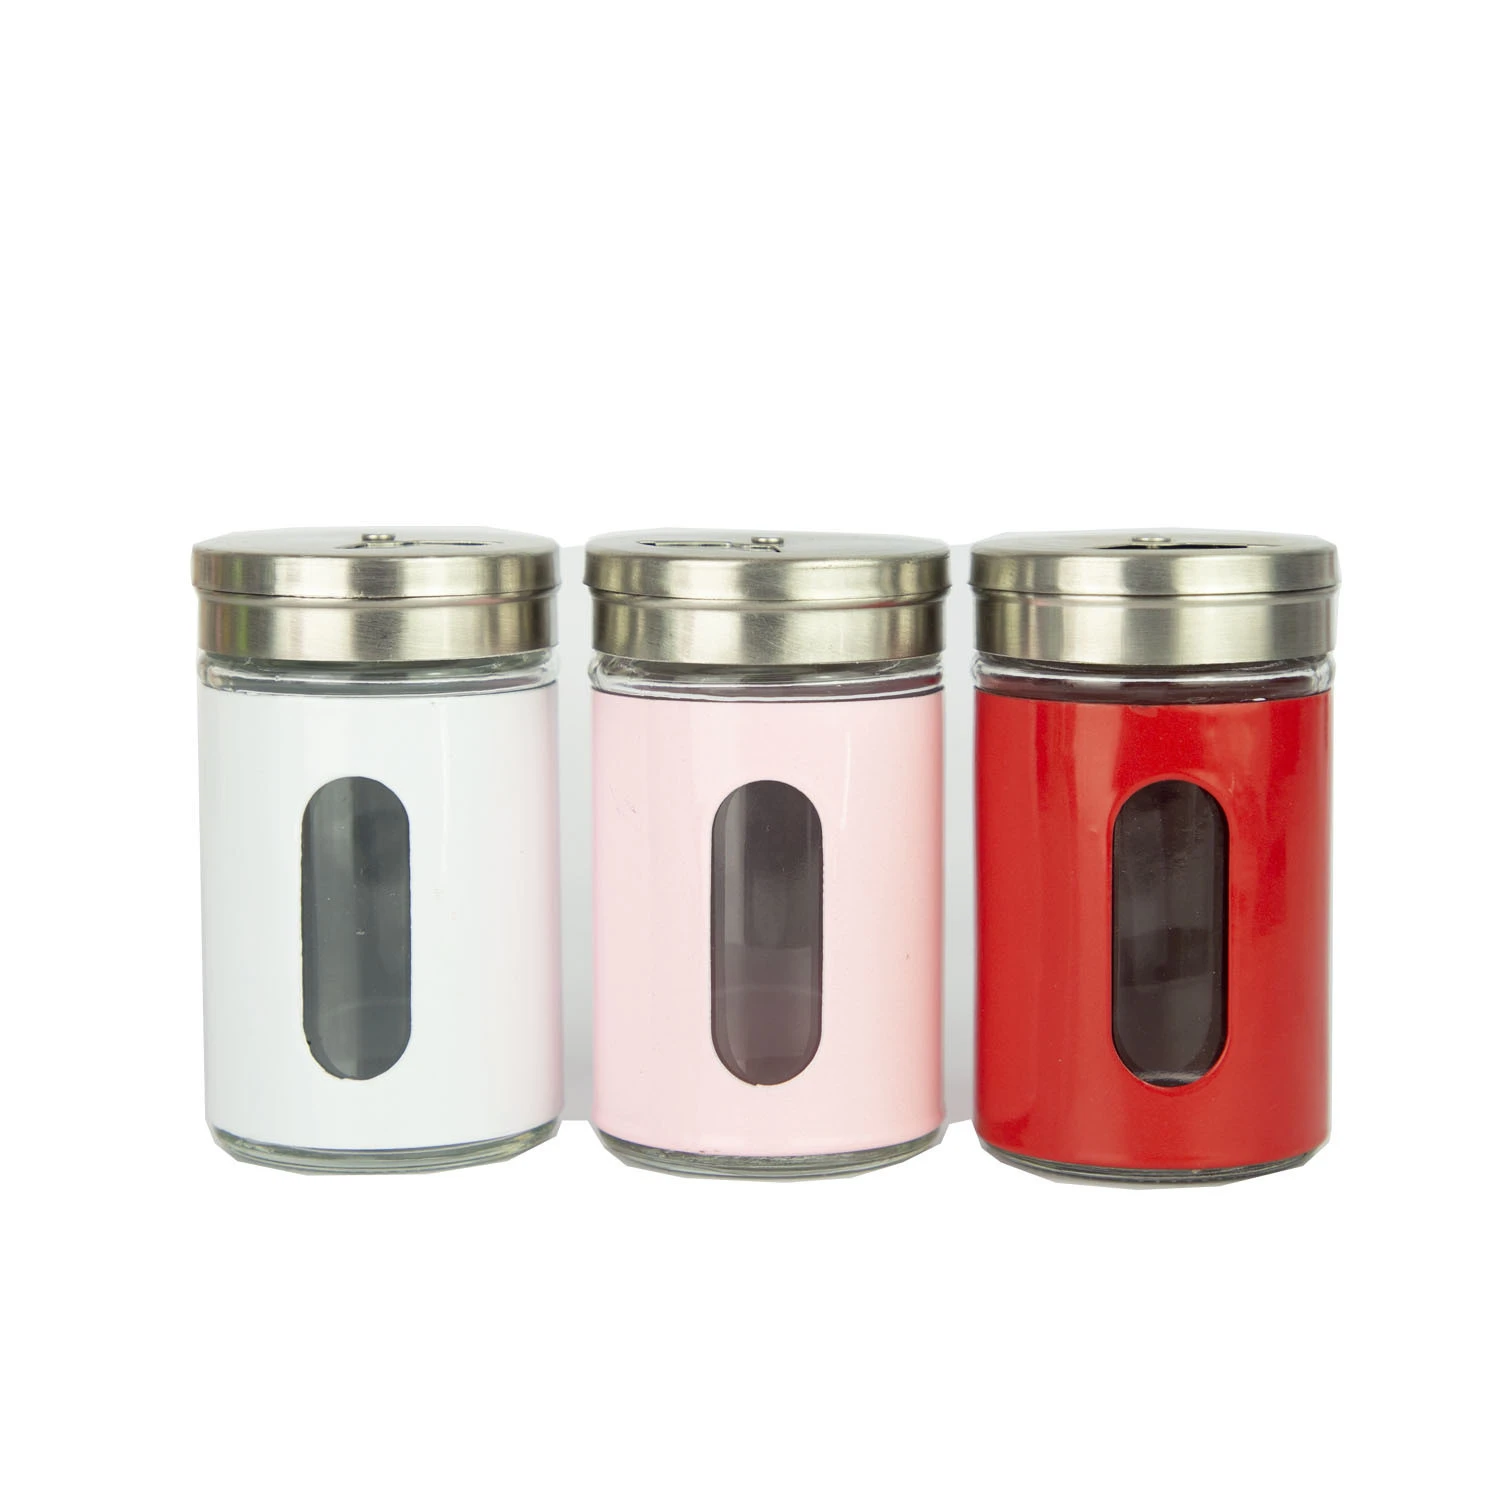 Factory Wholesale High Quality Low Price Stainless Steel Spice Bottles Spice Jar Pepper Salt Pepper Jar Shaker With Rotating Cap